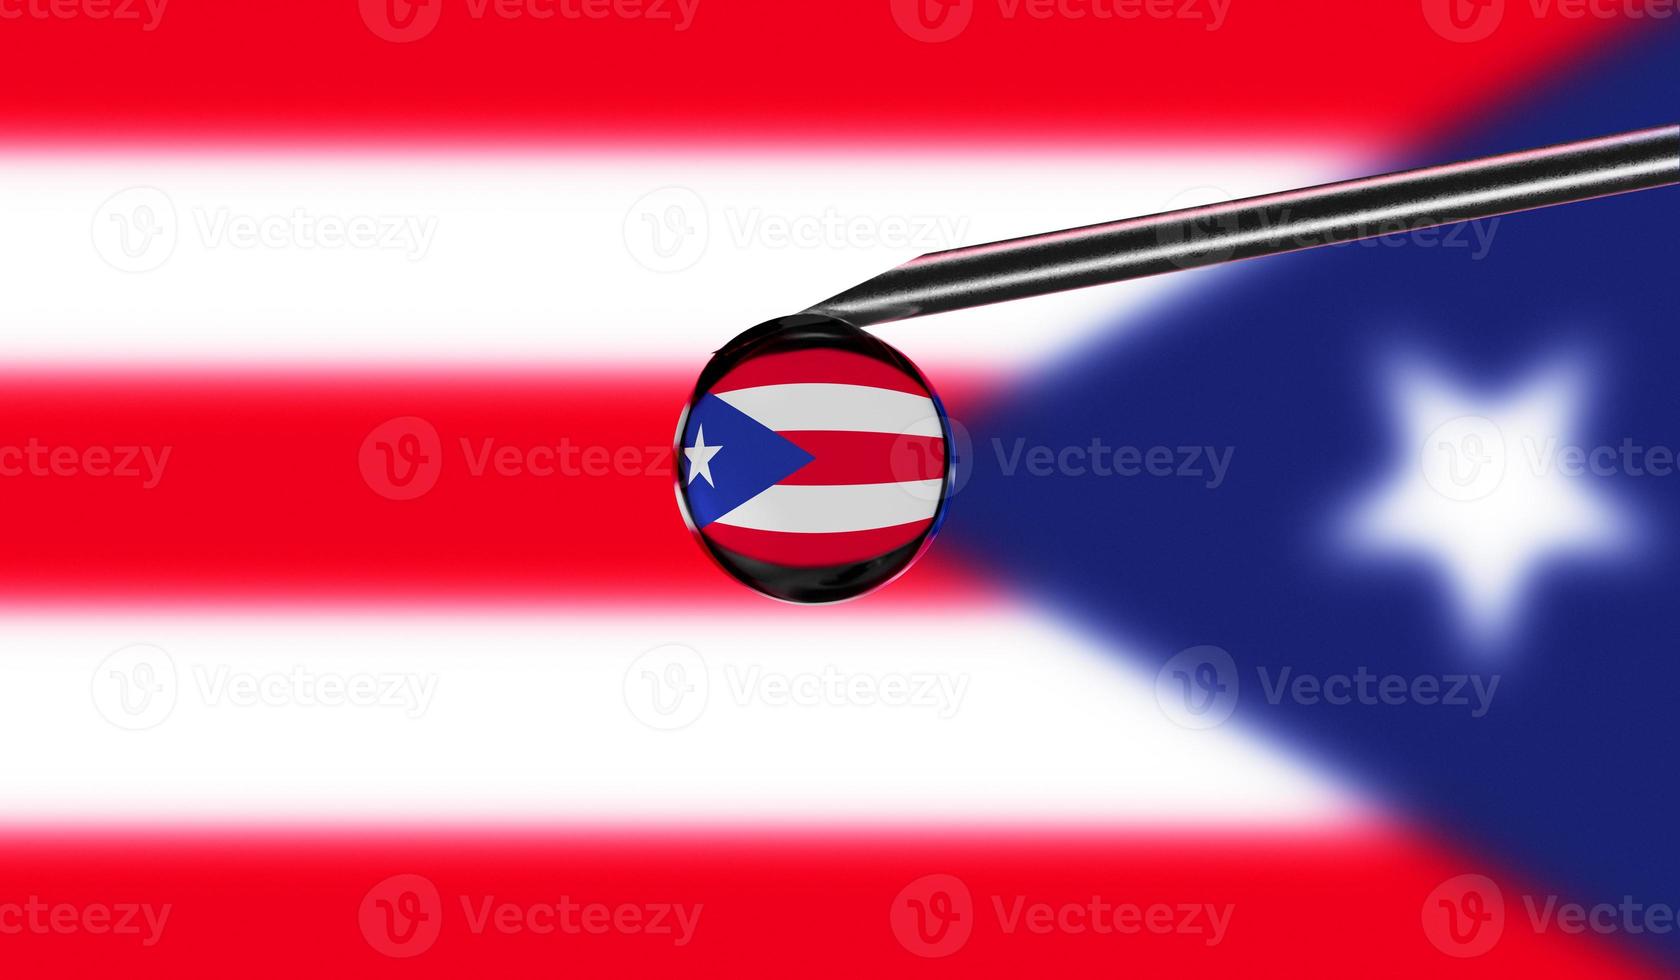 Vaccine syringe with drop on needle against national flag of Puerto Rico background. Medical concept vaccination. Coronavirus Sars-Cov-2 pandemic protection. National safety idea. photo